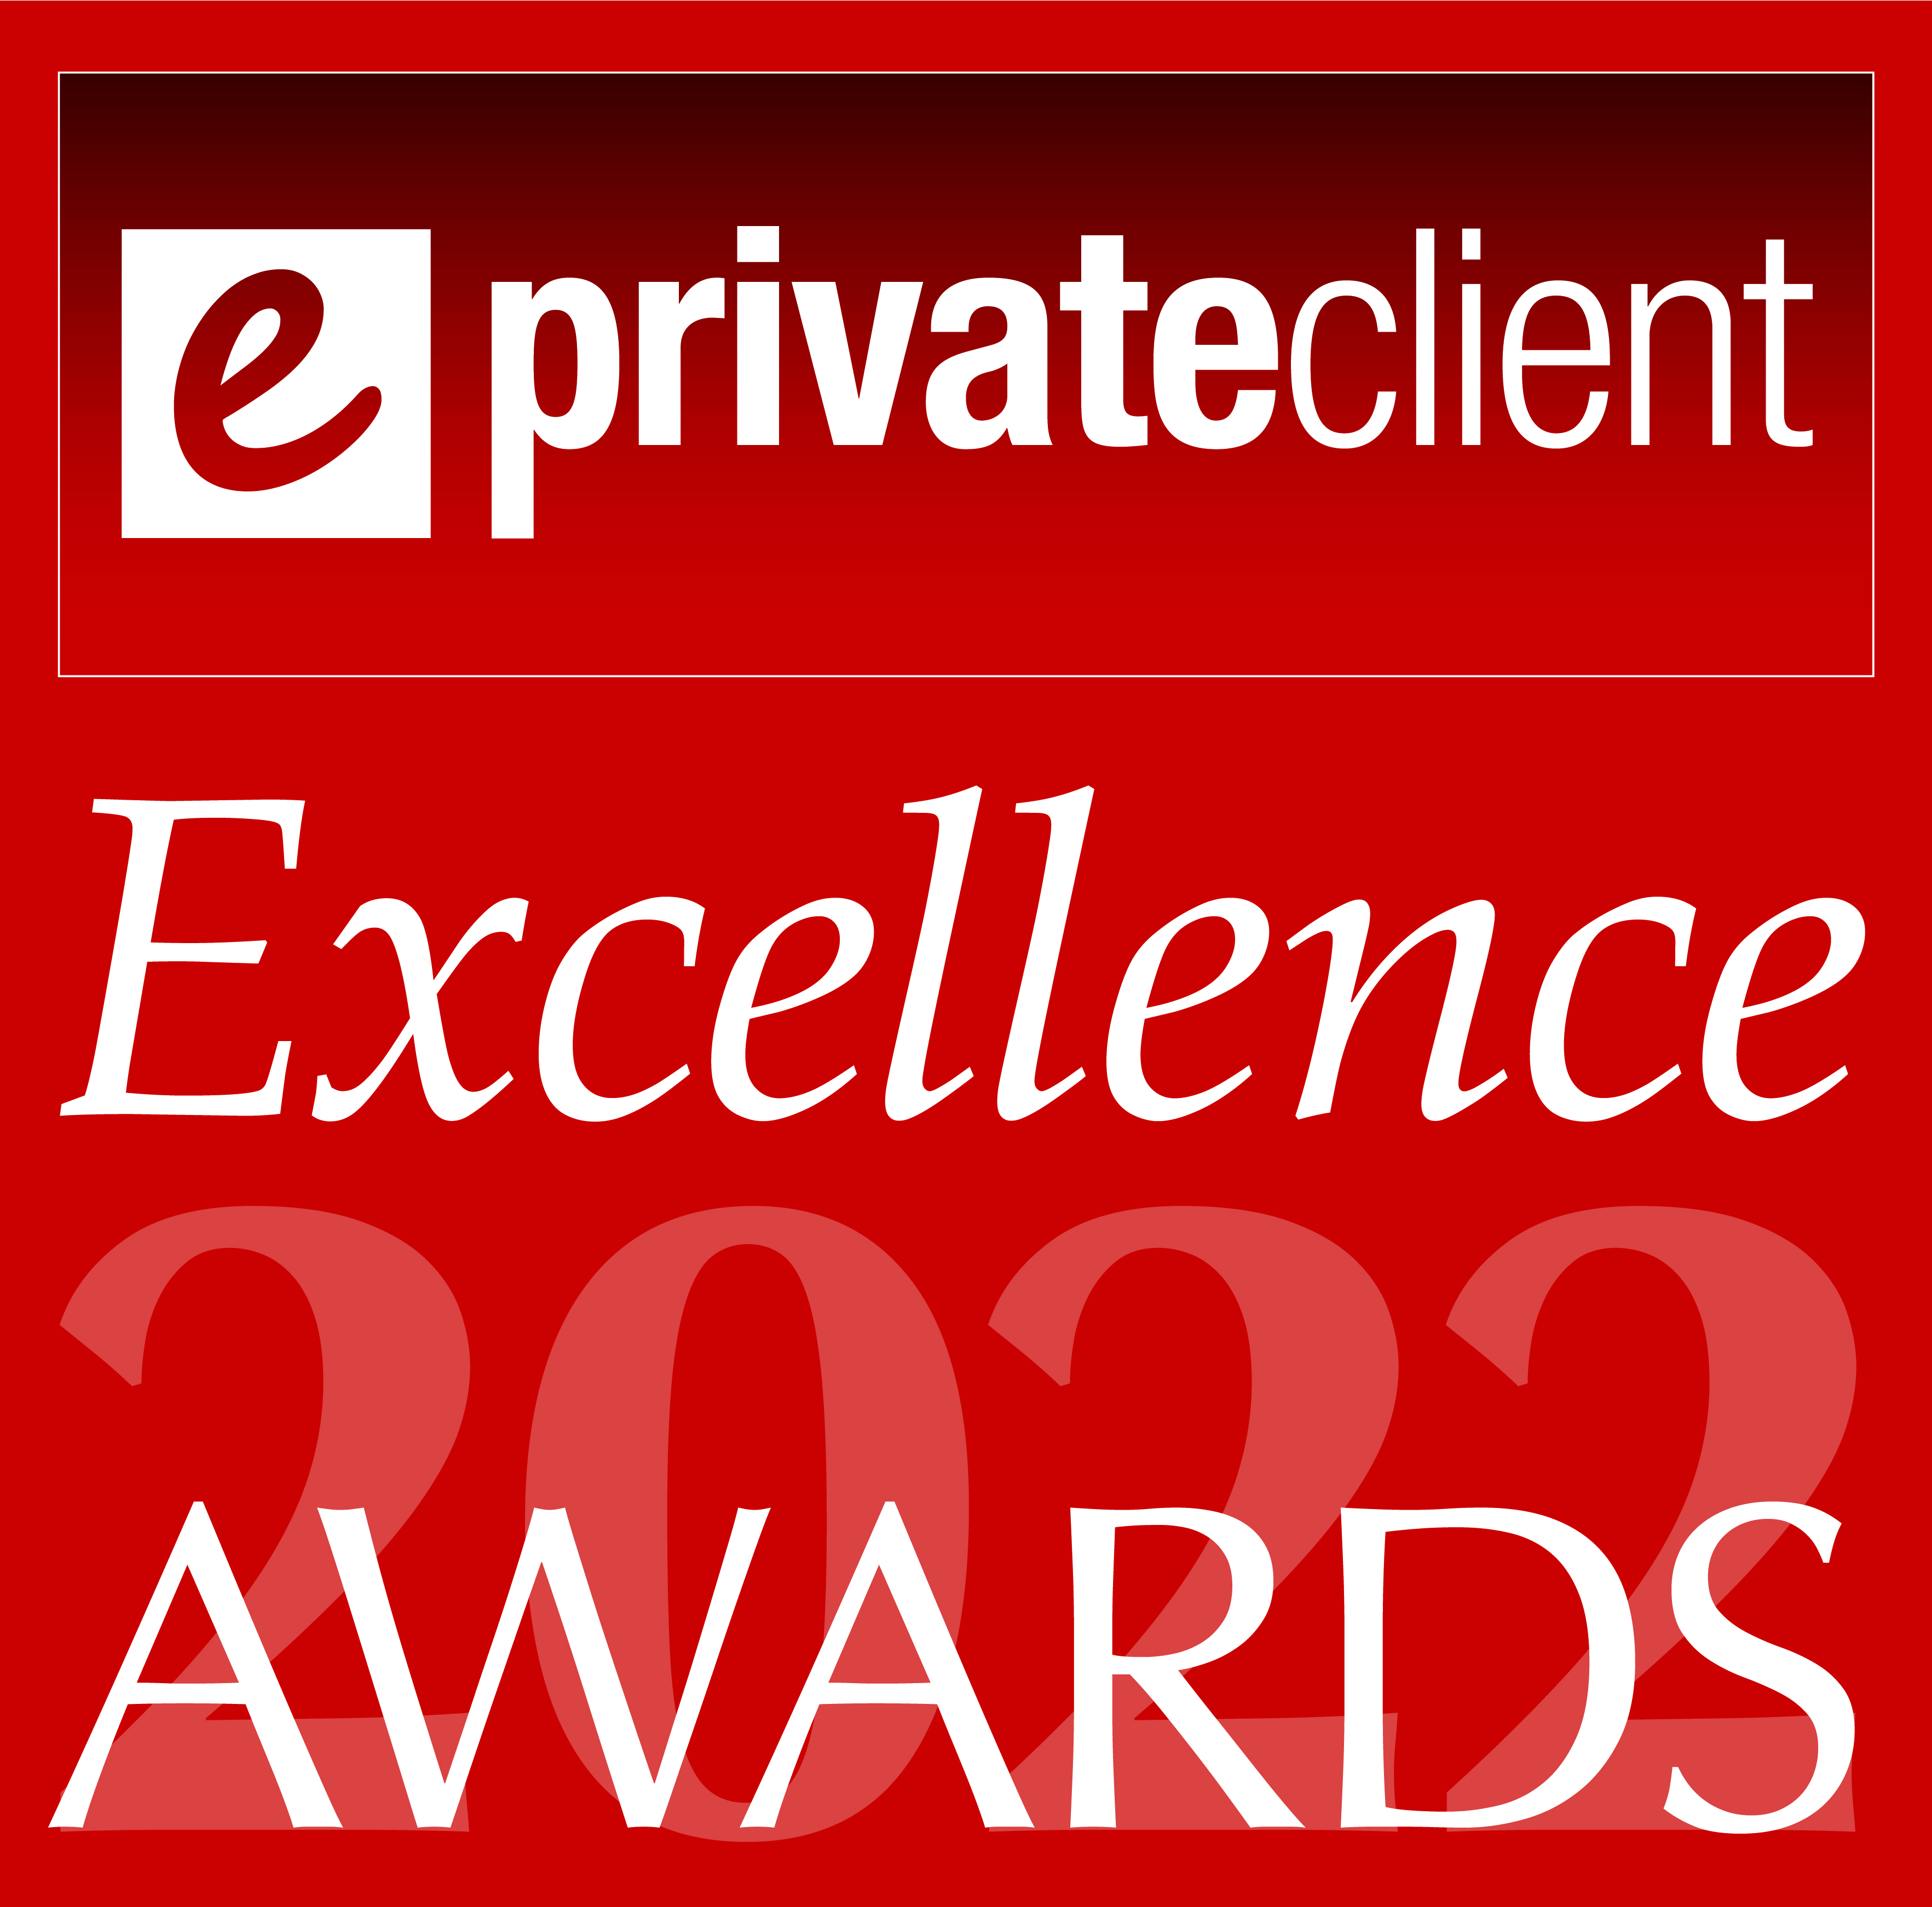 2022 eprivateclient Excellence Awards: 28 firms named as finalists